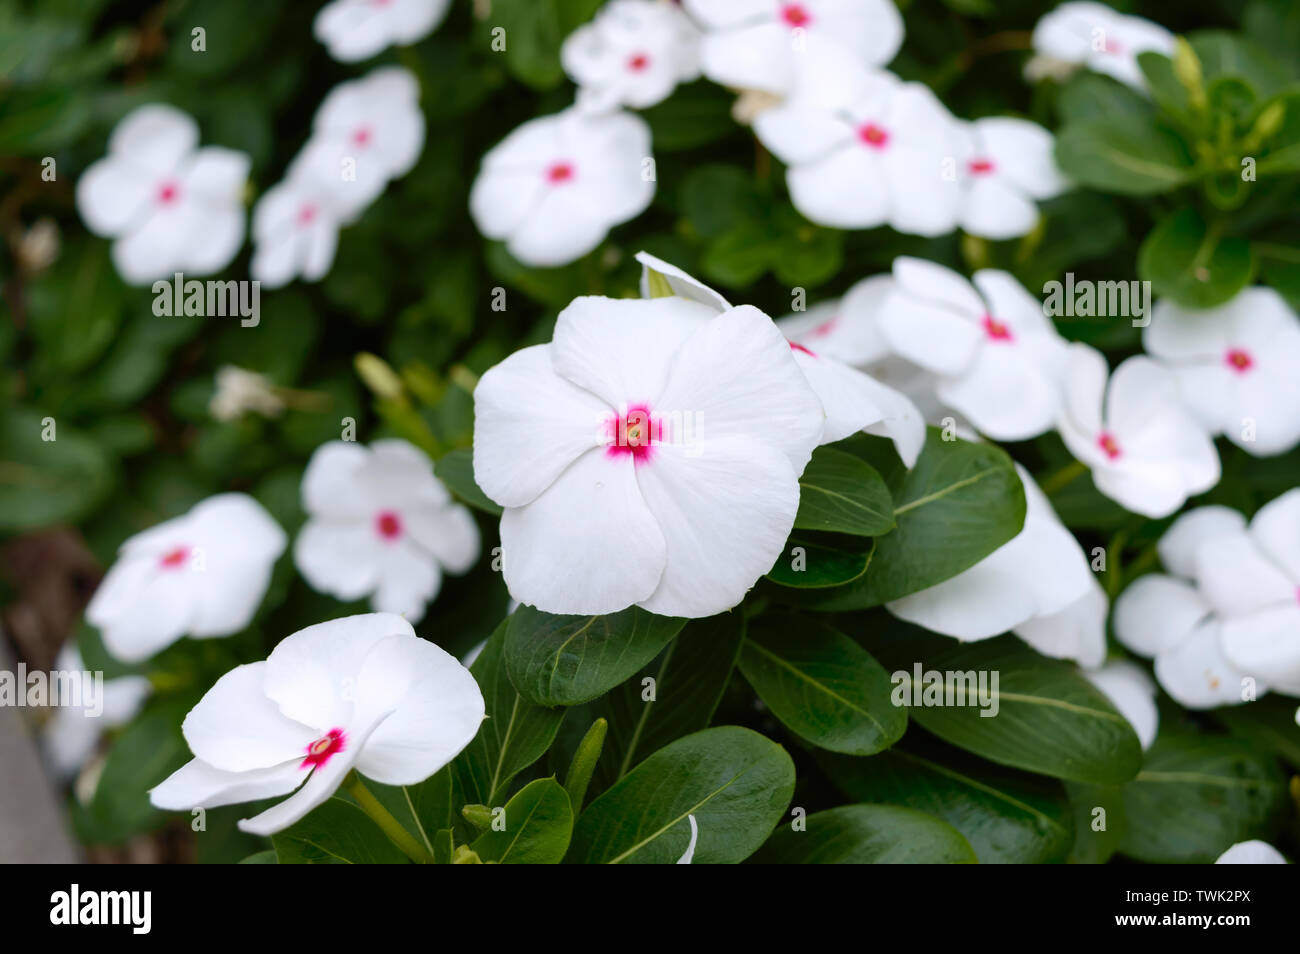 White Flowers Periwinkle In The Garden Beautiful Flower Beds With Flowering Shrubs Stock Photo Alamy